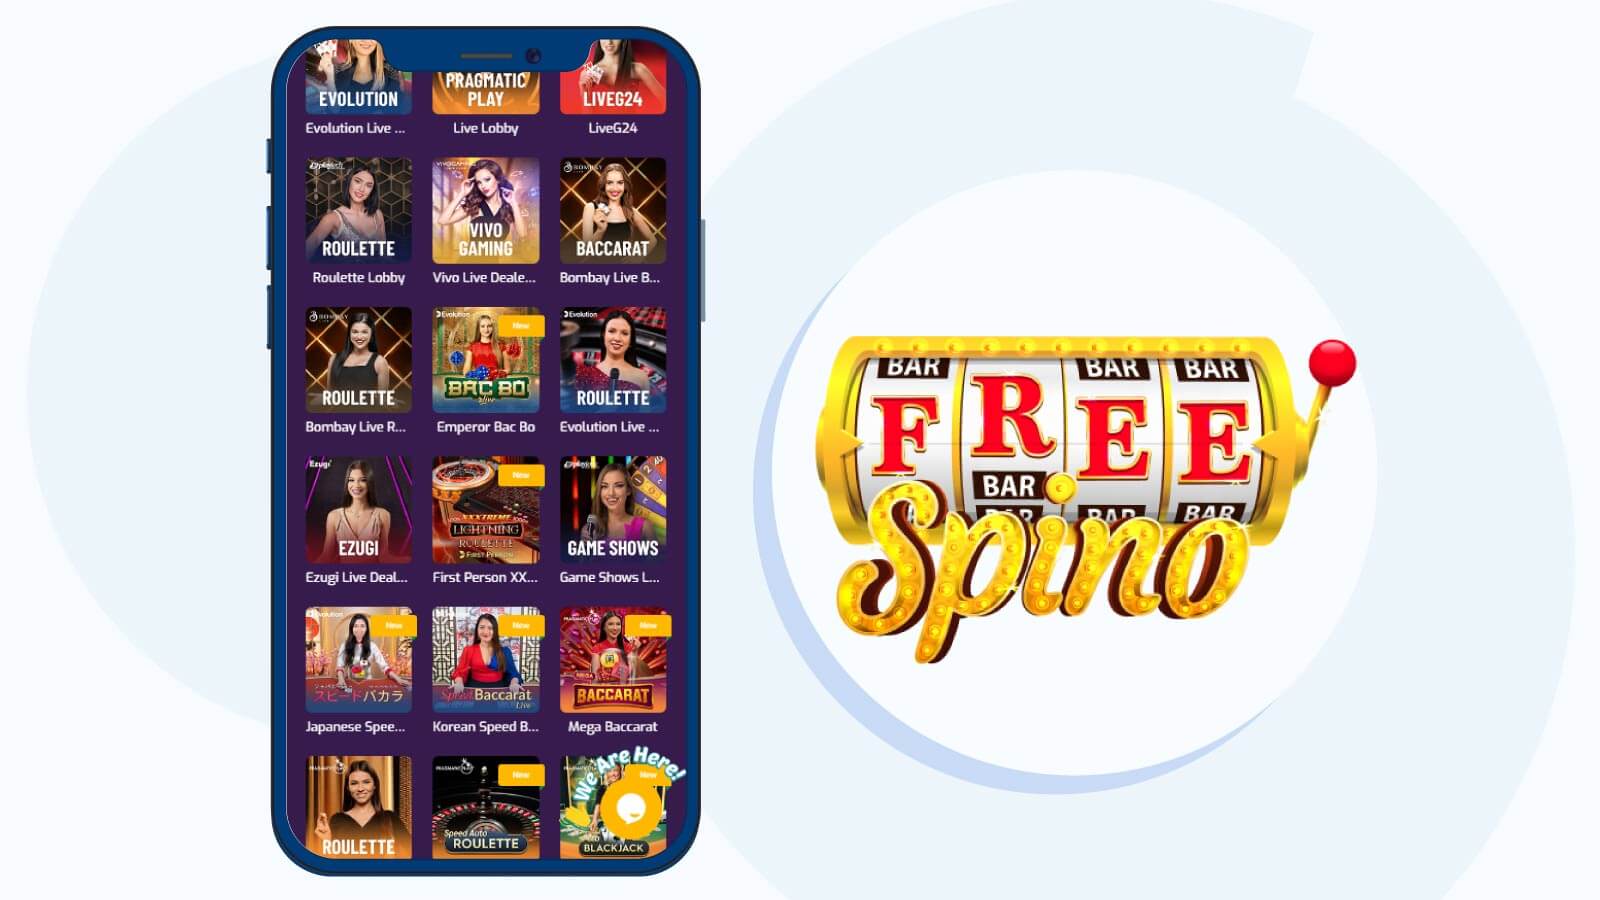 FreeSpino Casino – Largest Live Game Selection